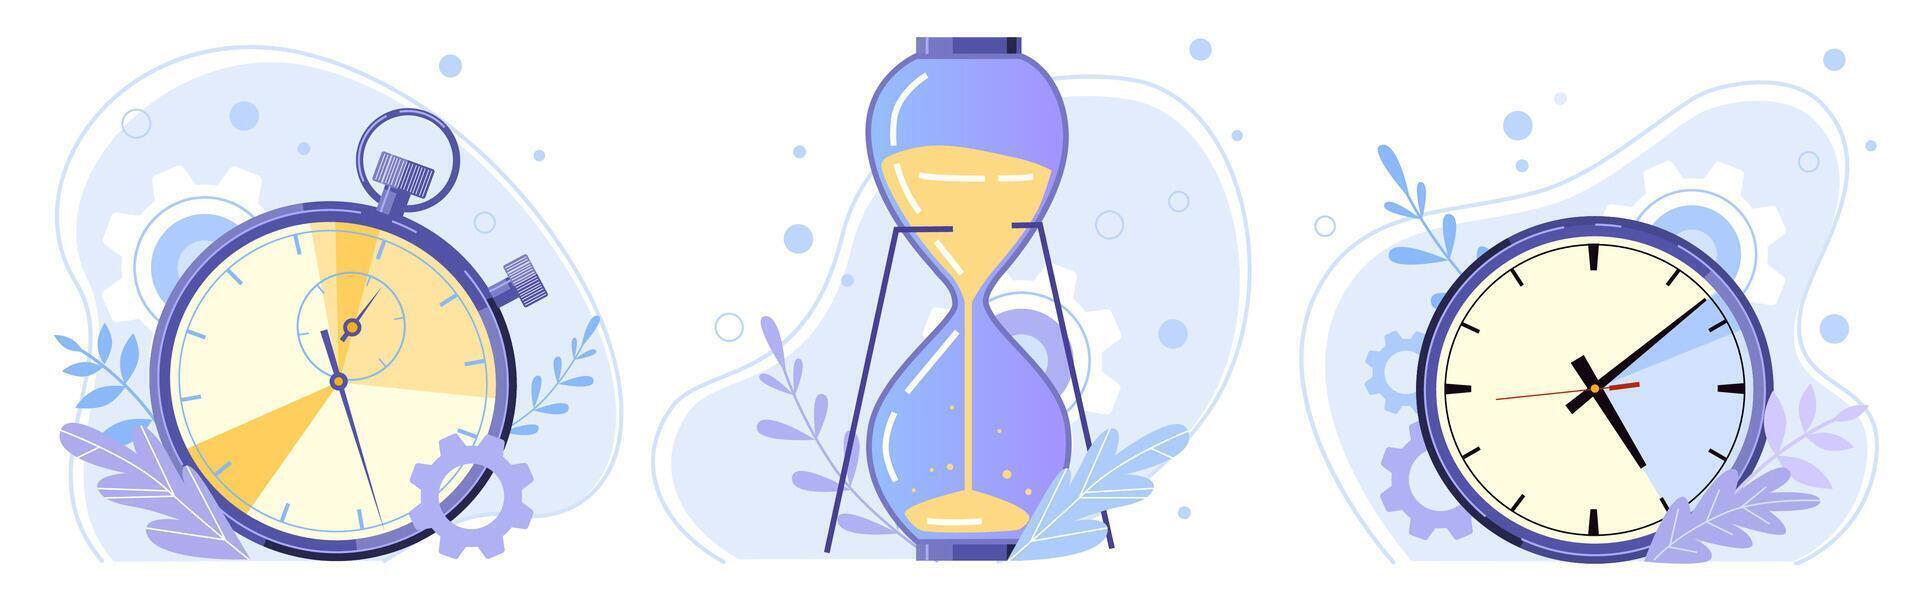 Clock, hourglass and stopwatch. Watch hours, timer countdown and sandglass flat vector illustration set. Time management concept. Sport and home timekeepers. Watch types collection